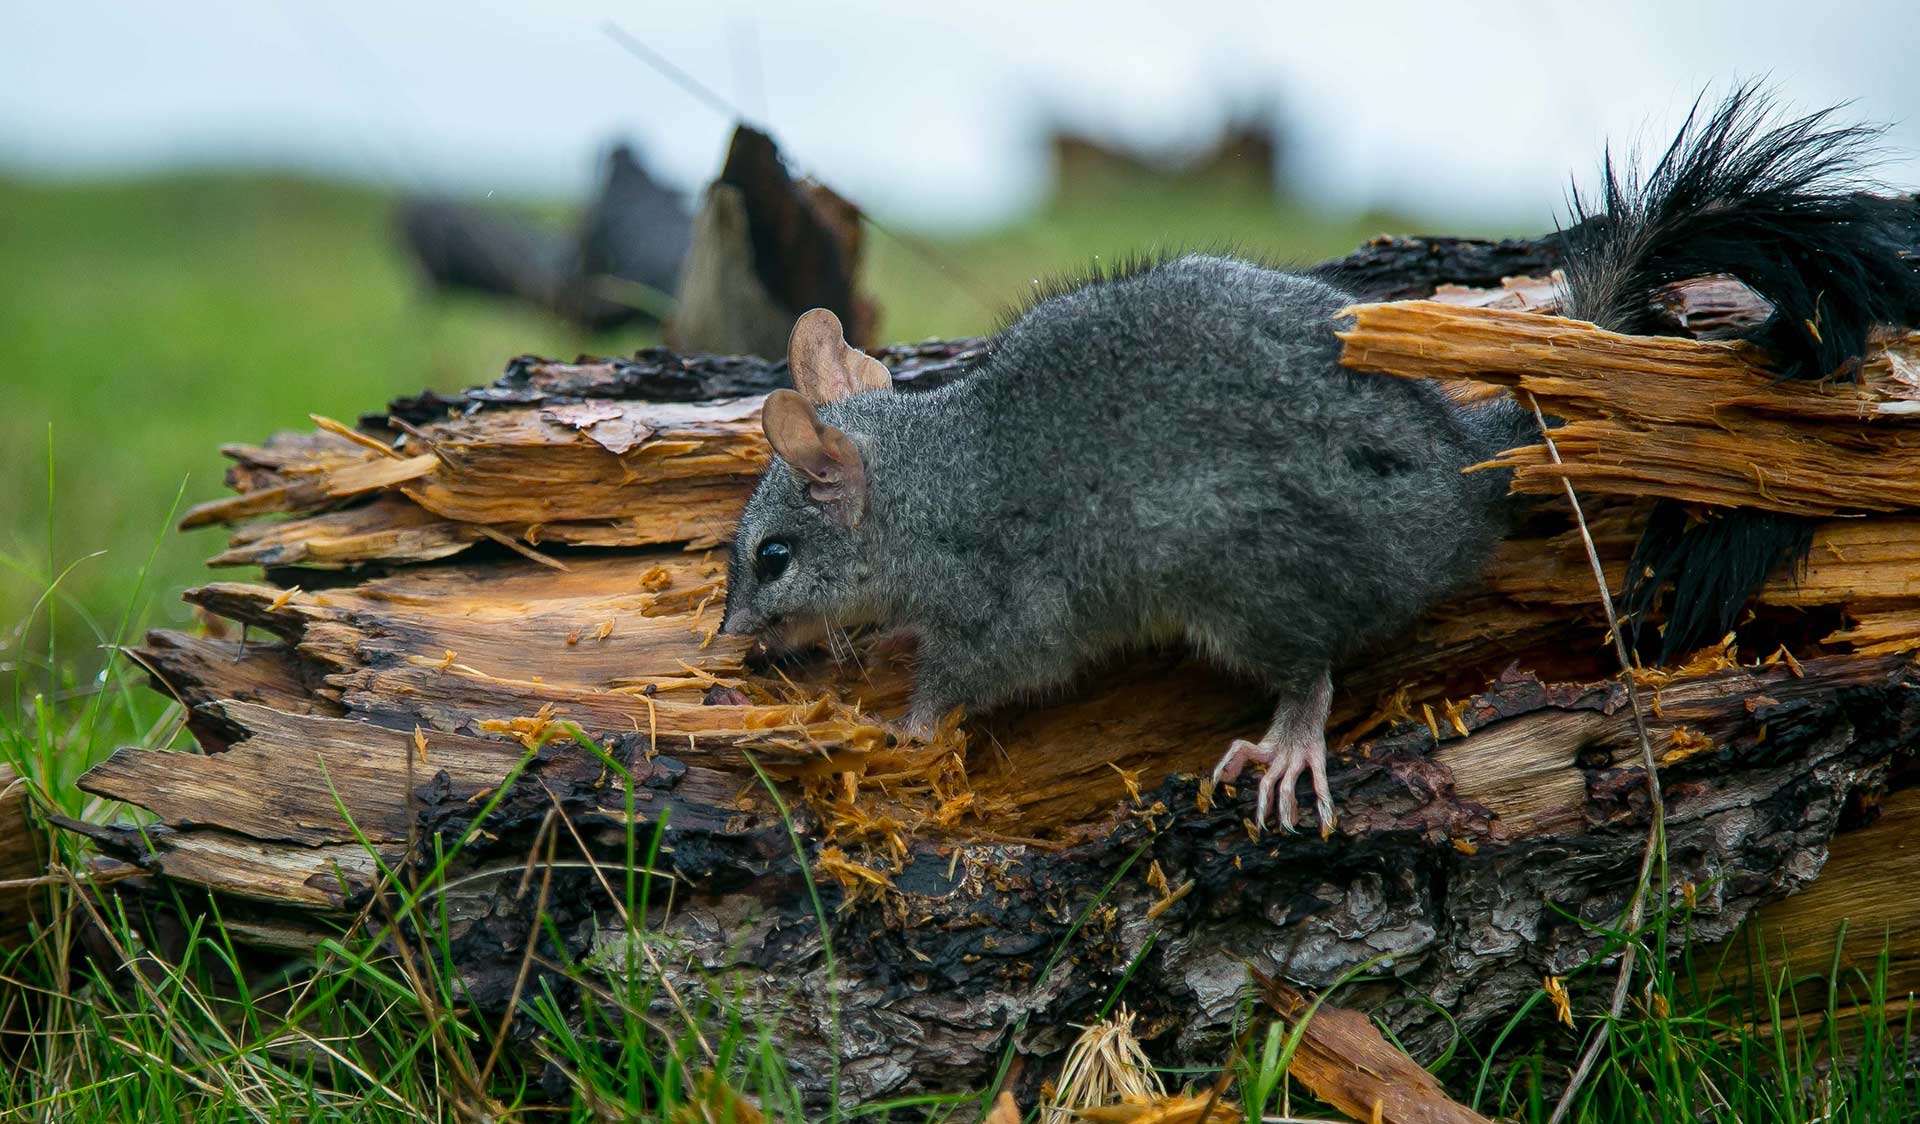 A brush tailed phascogale clings to a dead tree limb